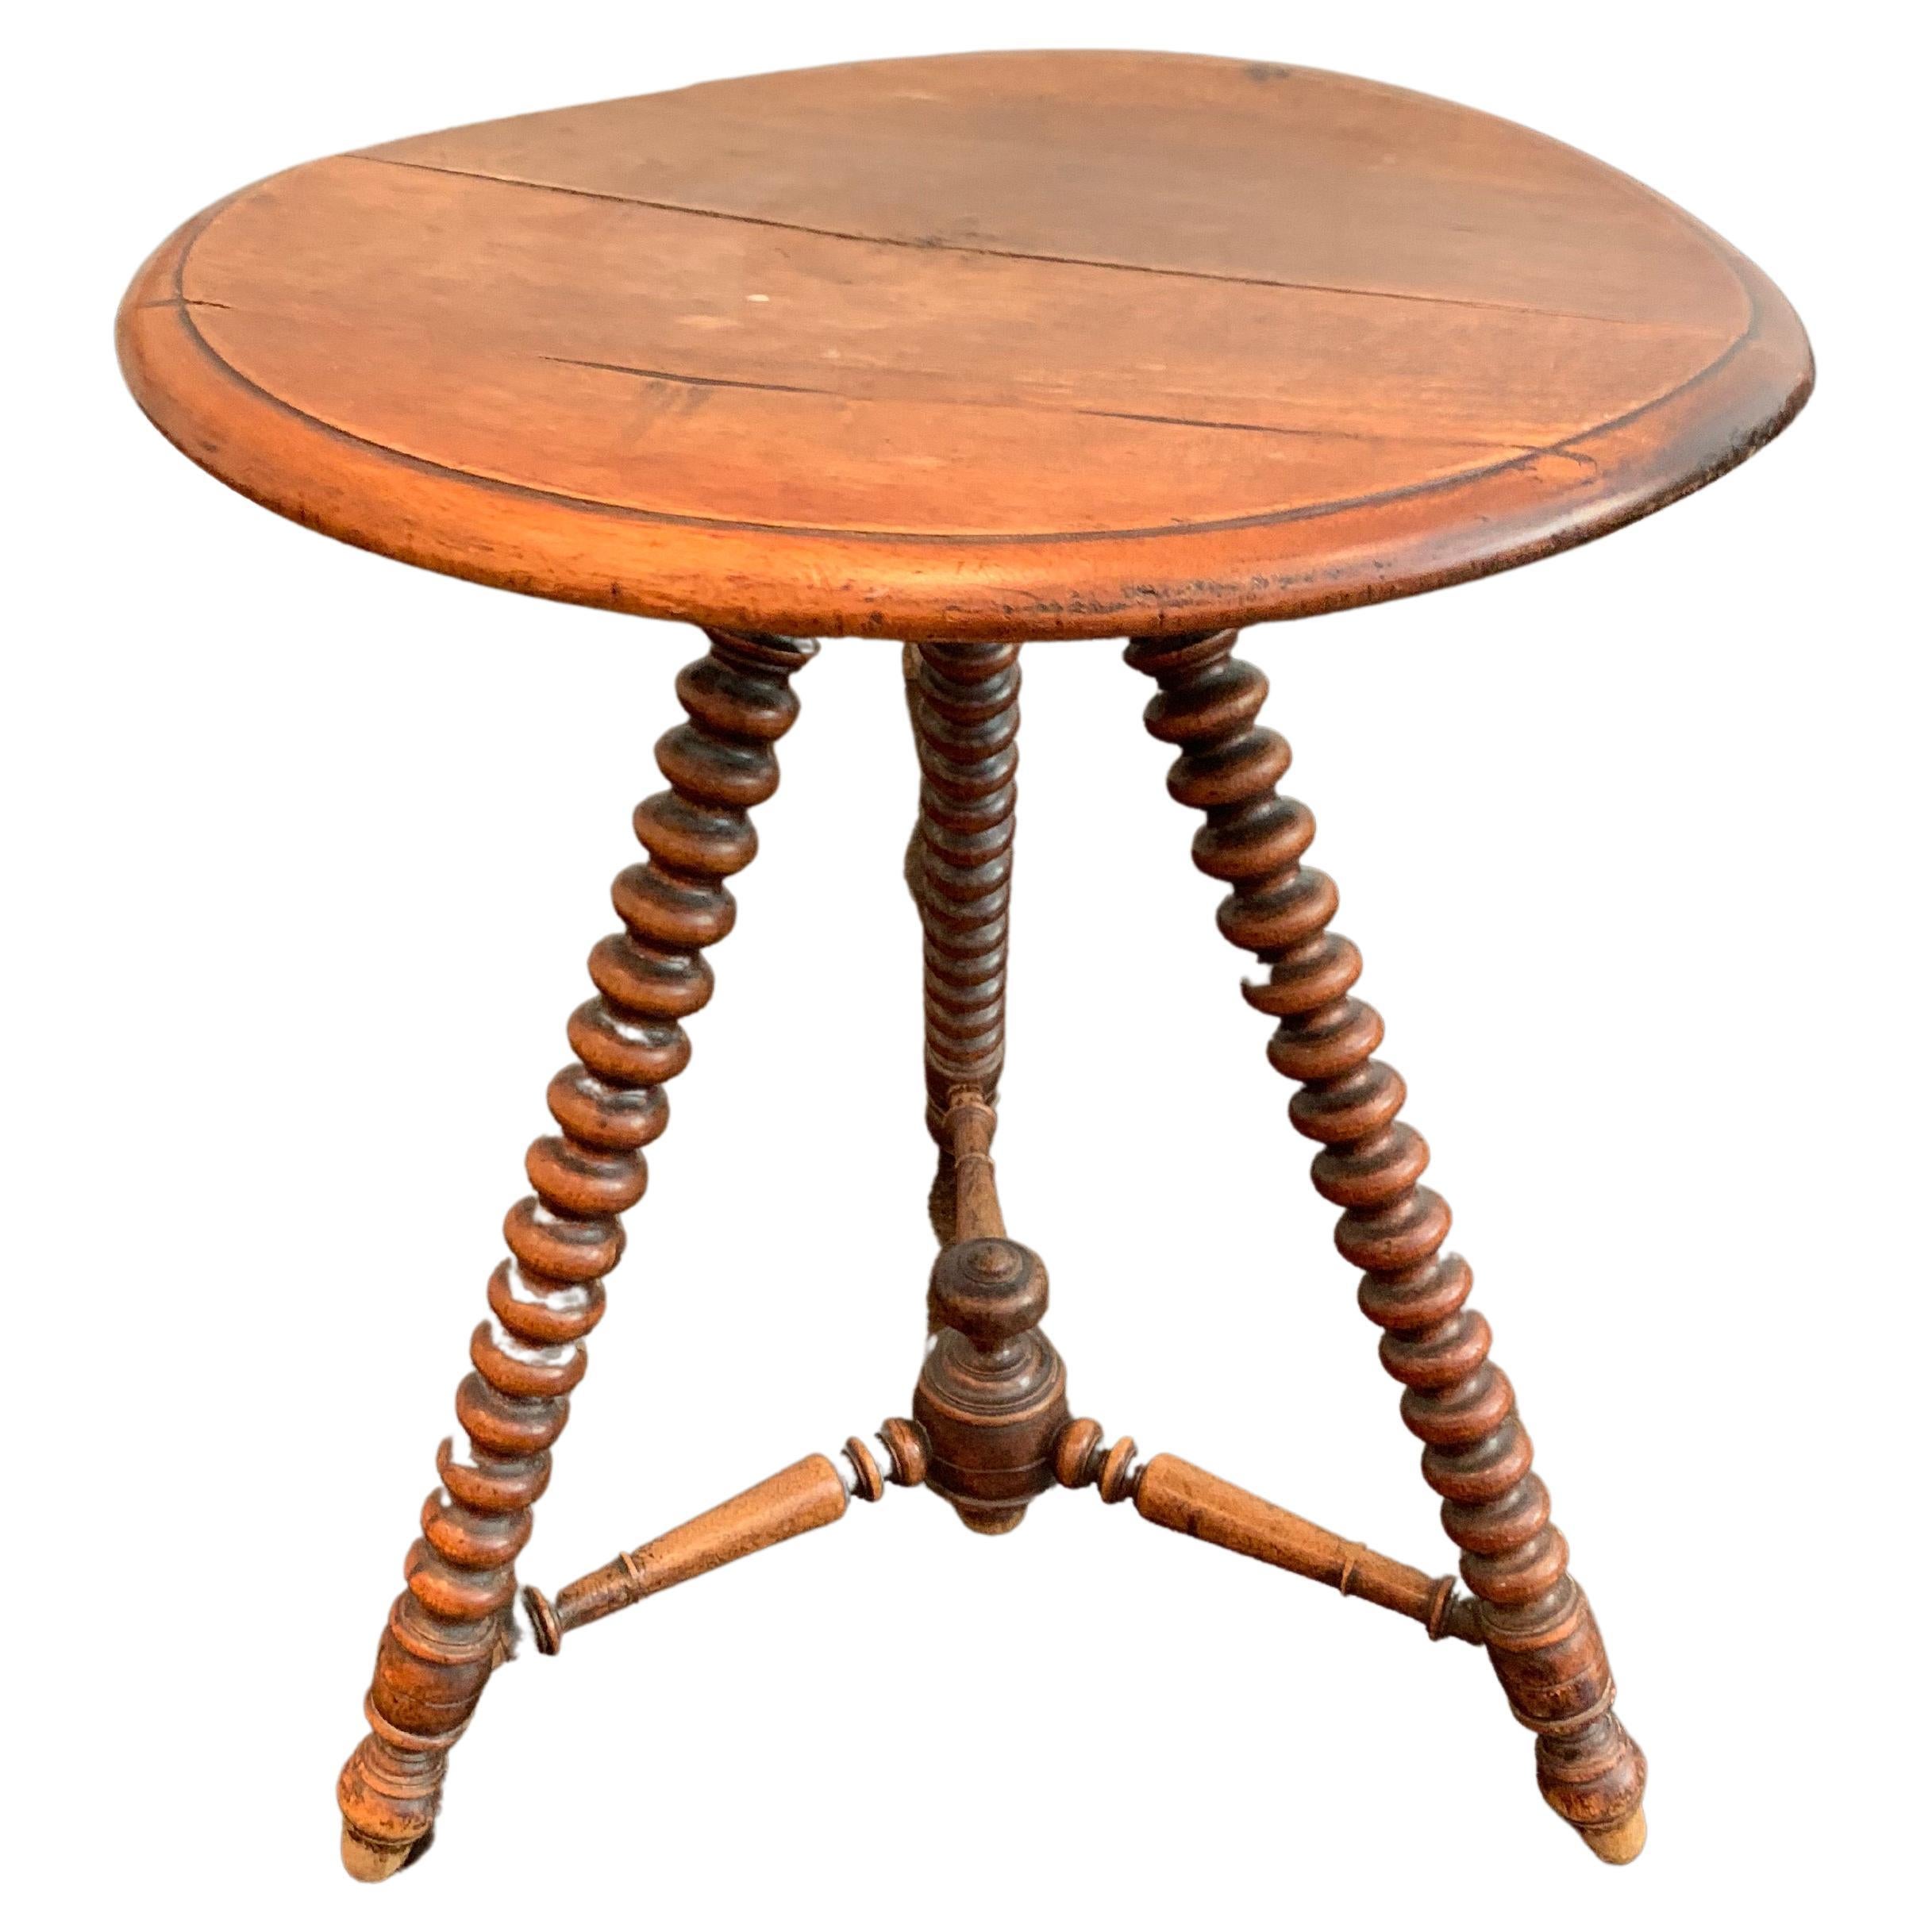 Round Turned Leg Table With Knotted Legs